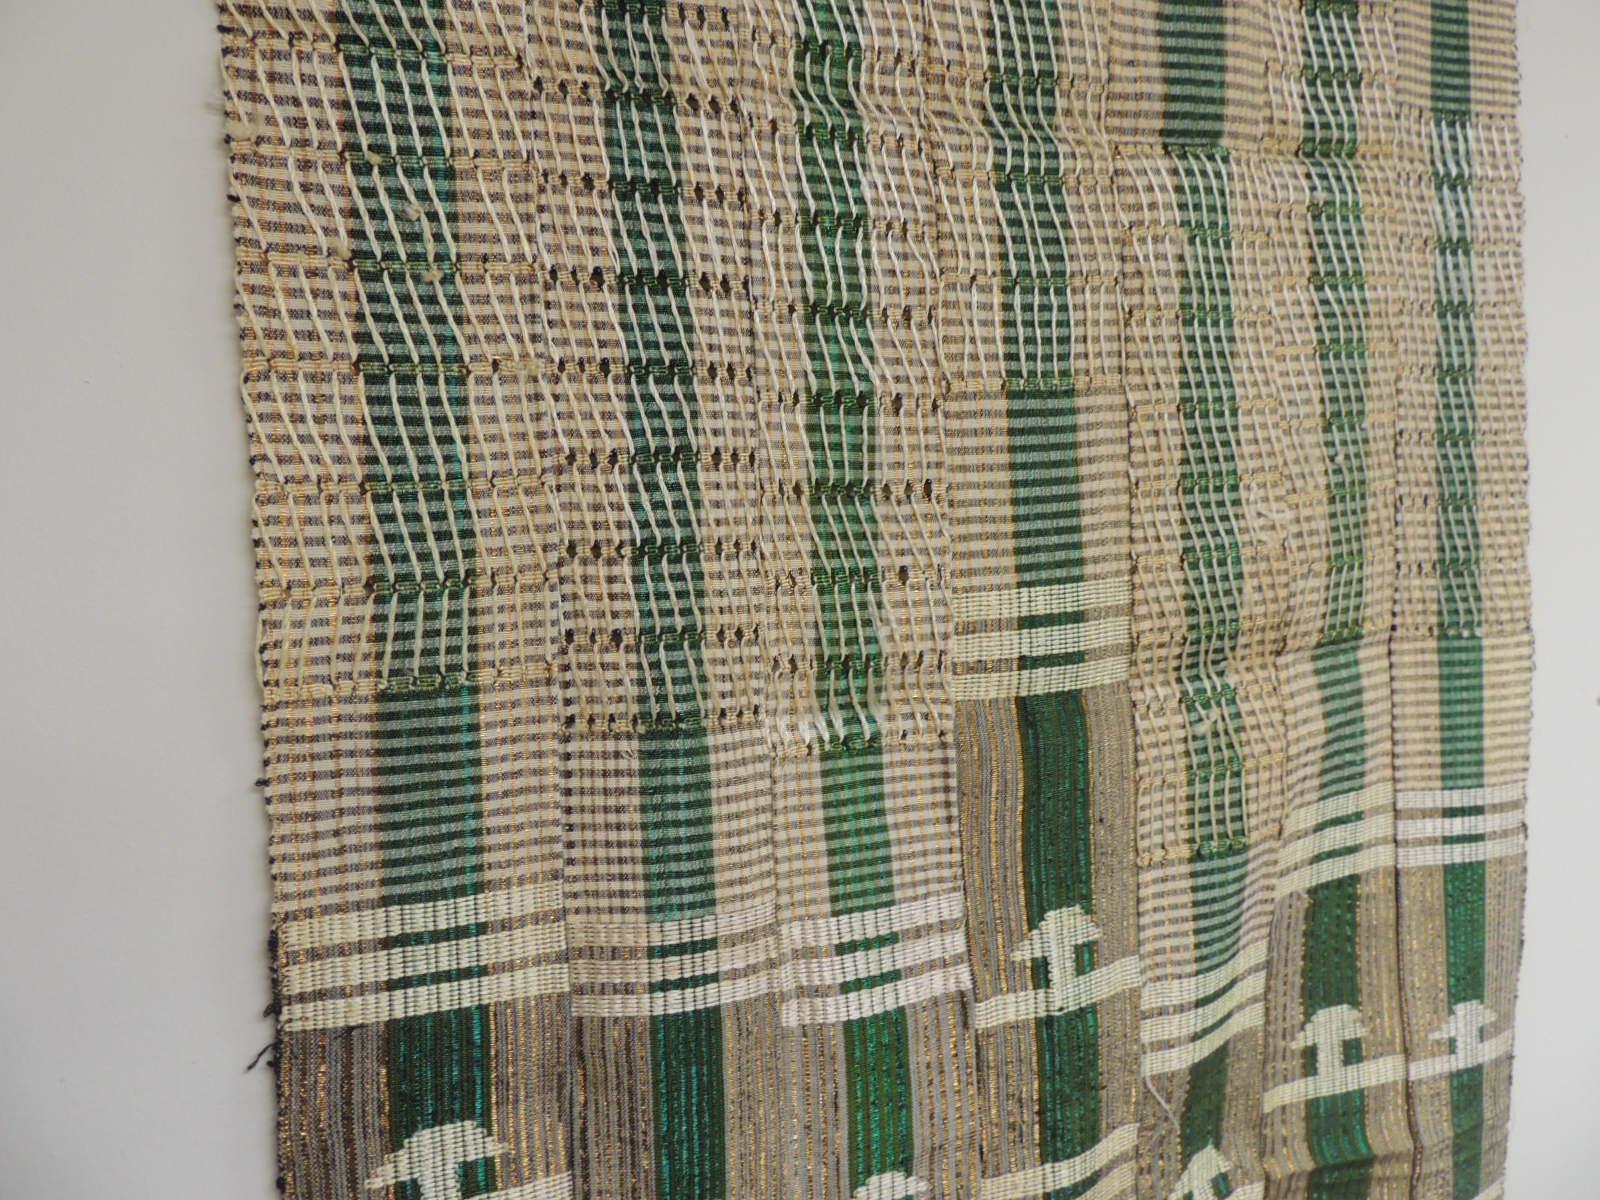 Vintage green and gold Yoruba stripe woven African textile
The Yoruba are highly fashion-conscious people. Colors change from season to season and such non-traditional fibers as Lurex can be introduced into strip woven cloth. A common form of